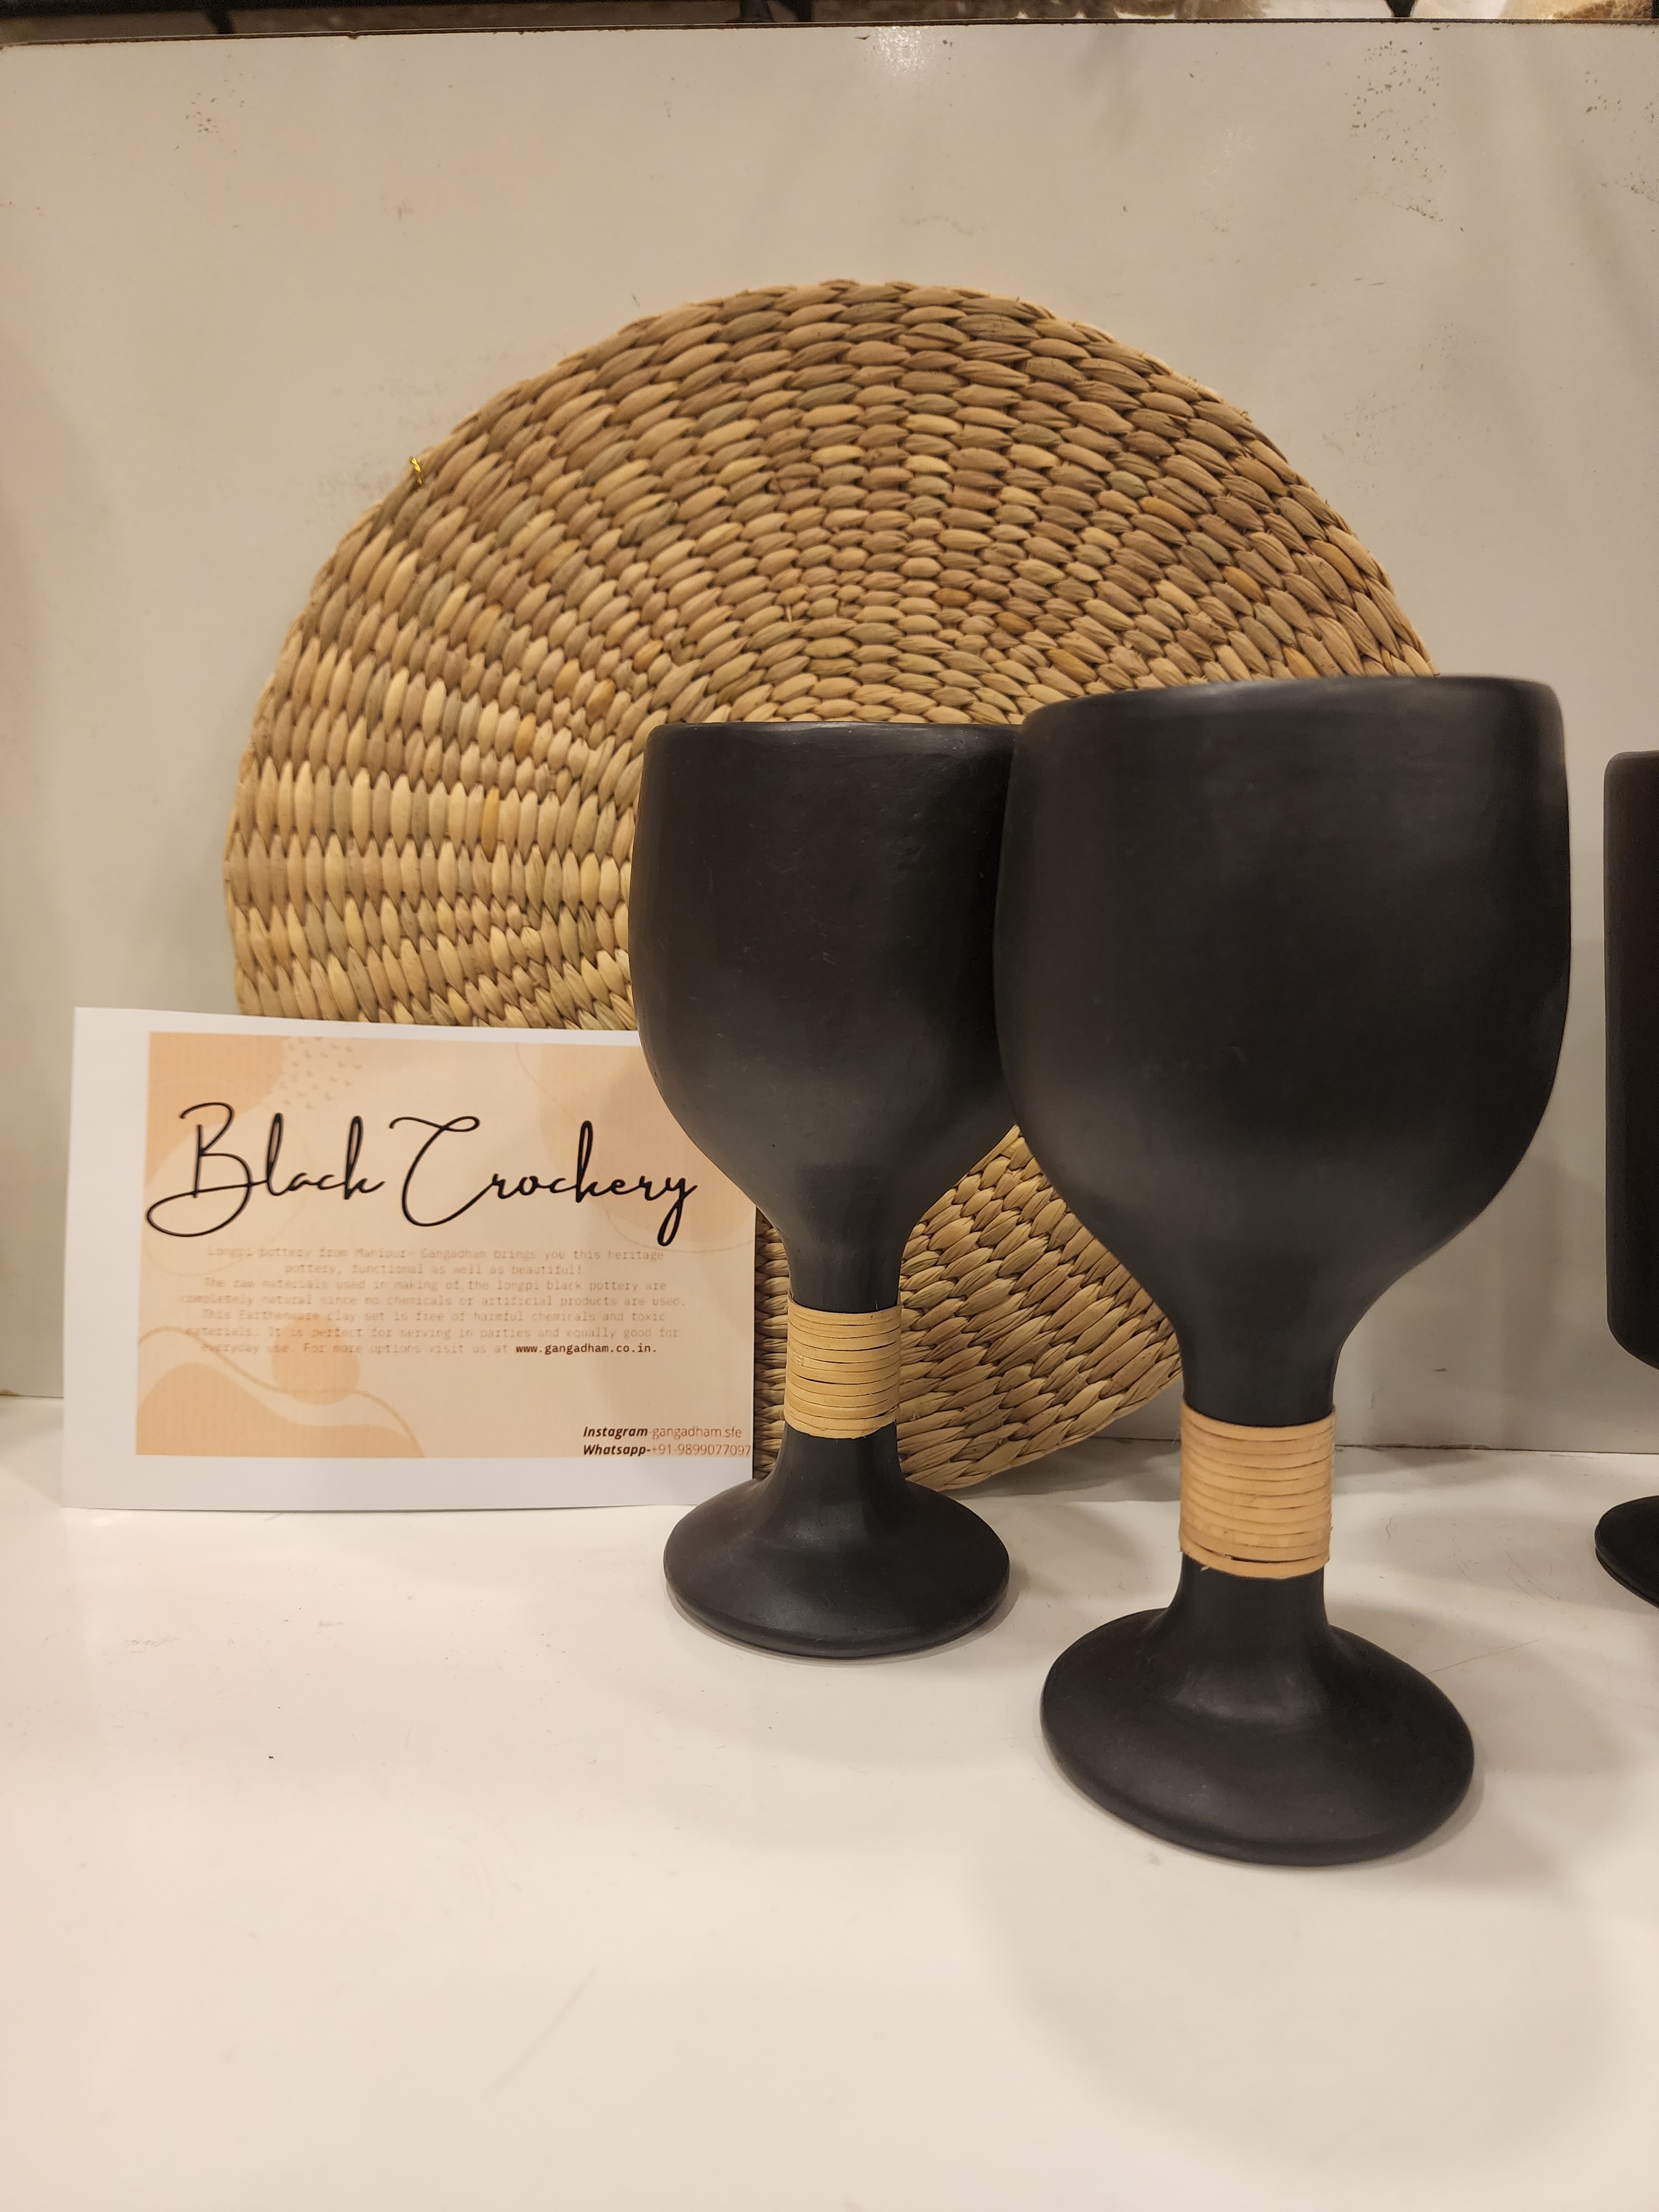 Natural black clay handcrafted wine glasses